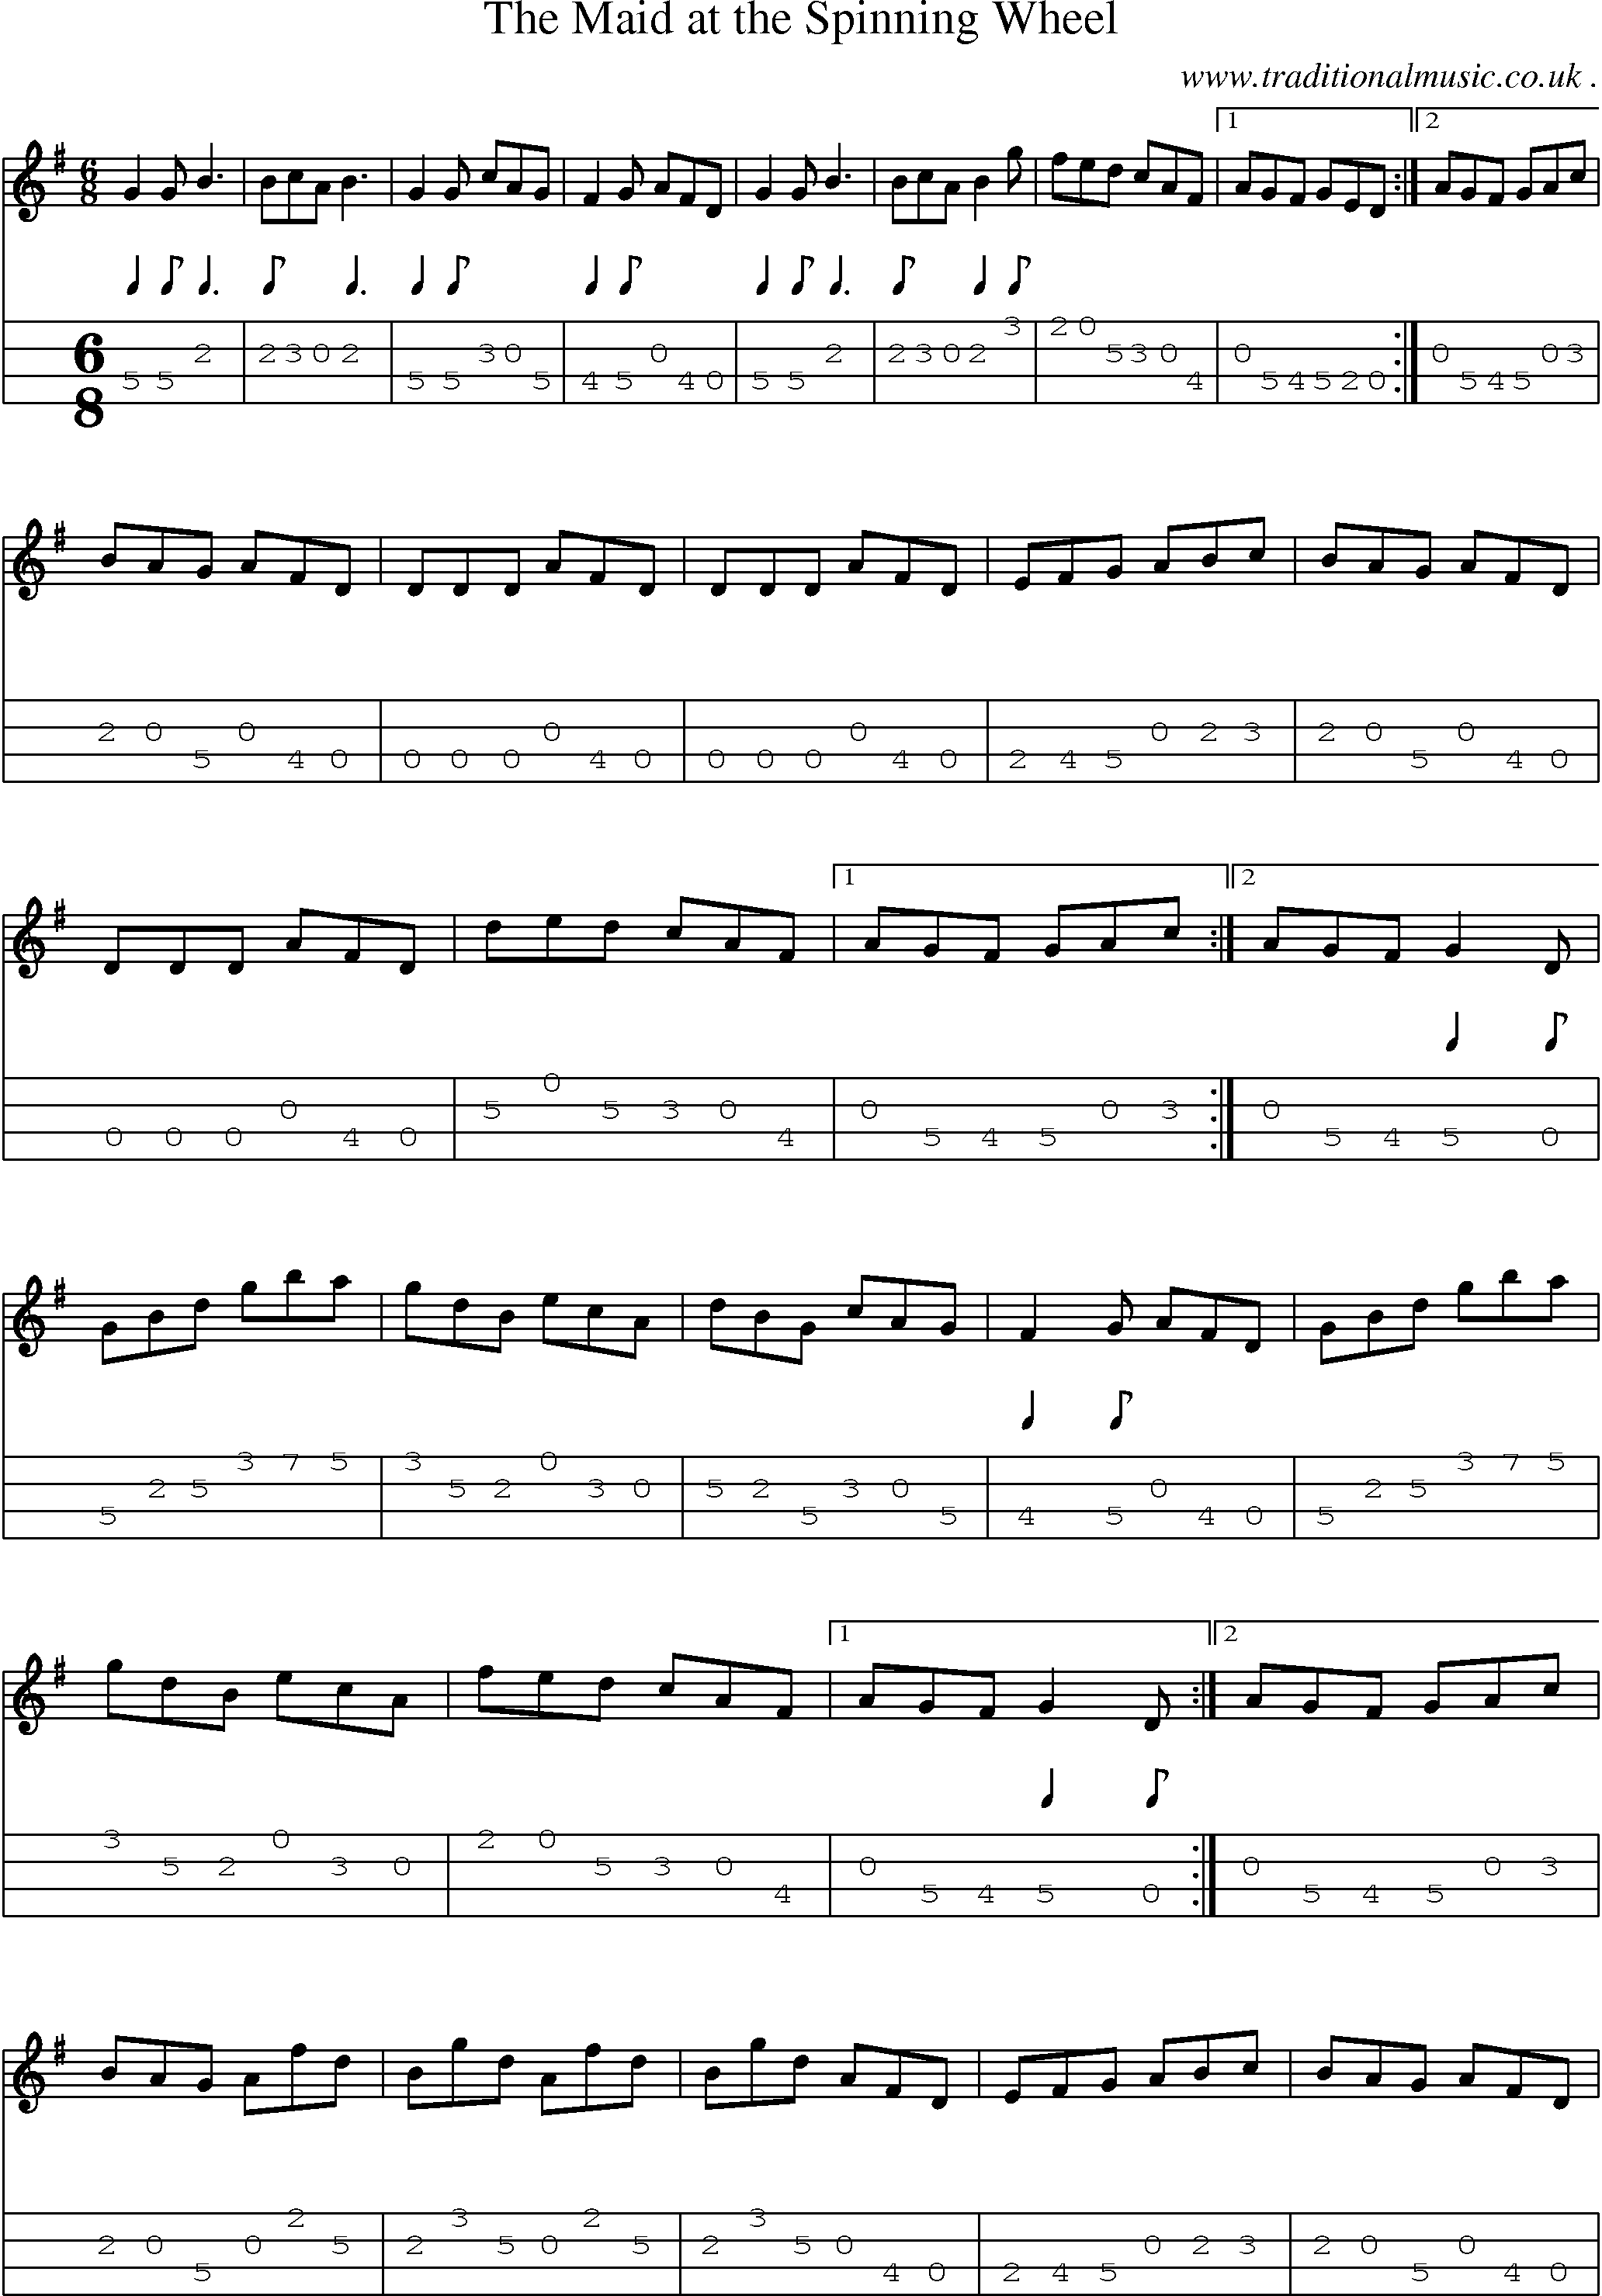 Sheet-Music and Mandolin Tabs for The Maid At The Spinning Wheel